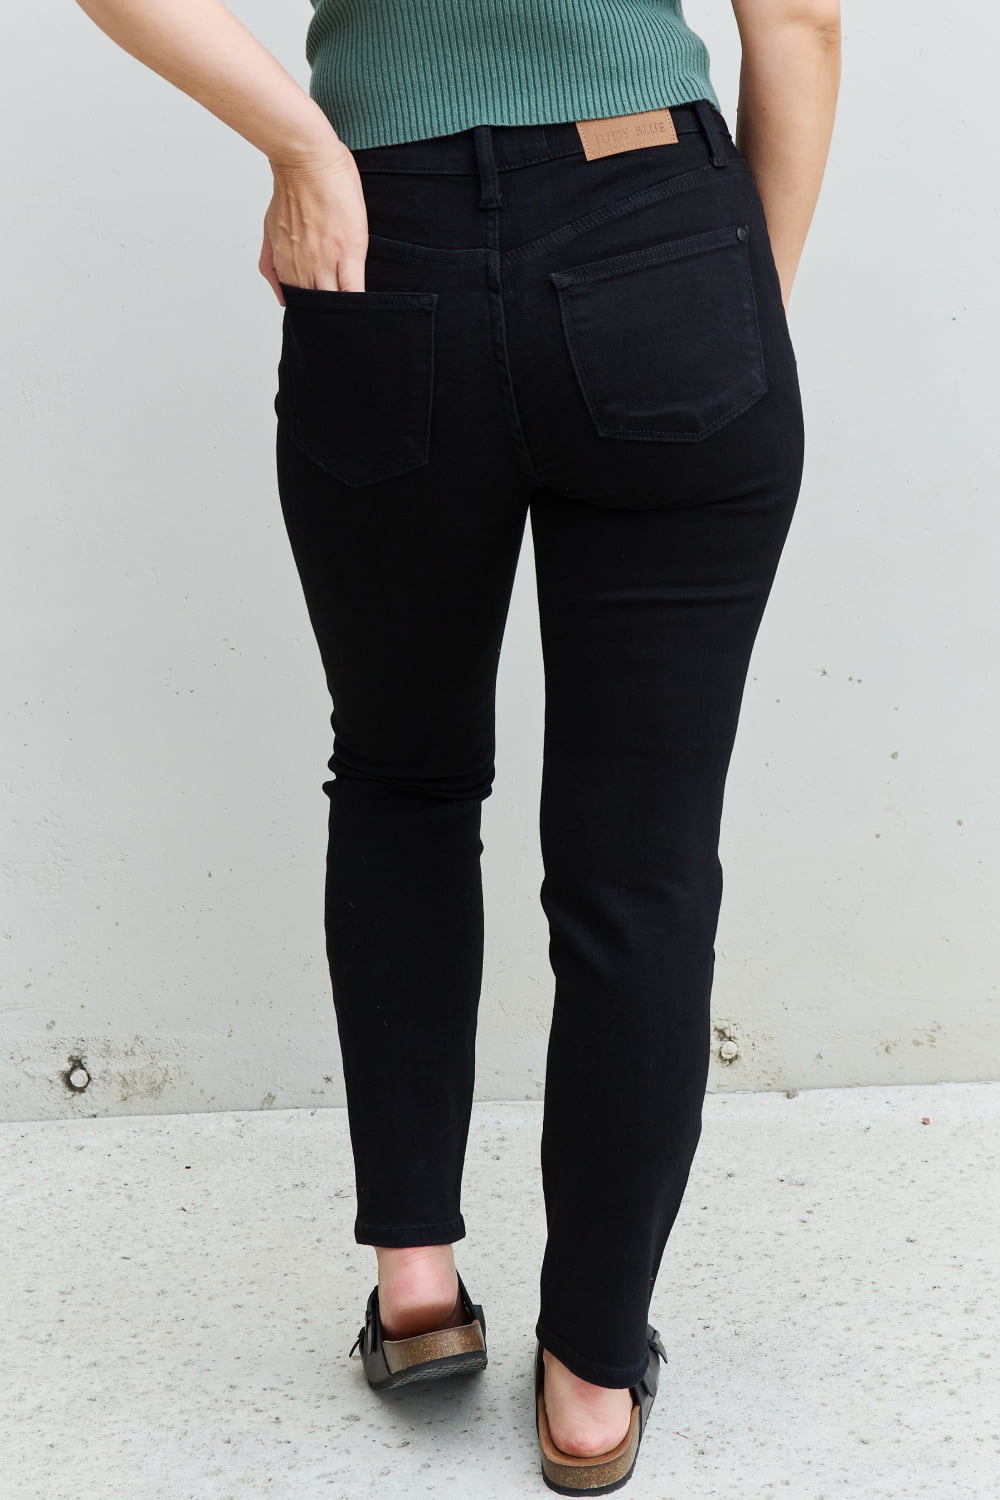 Back View, Judy Blue, Mid-Rise, Black Slim Fit Jeans Style 88756